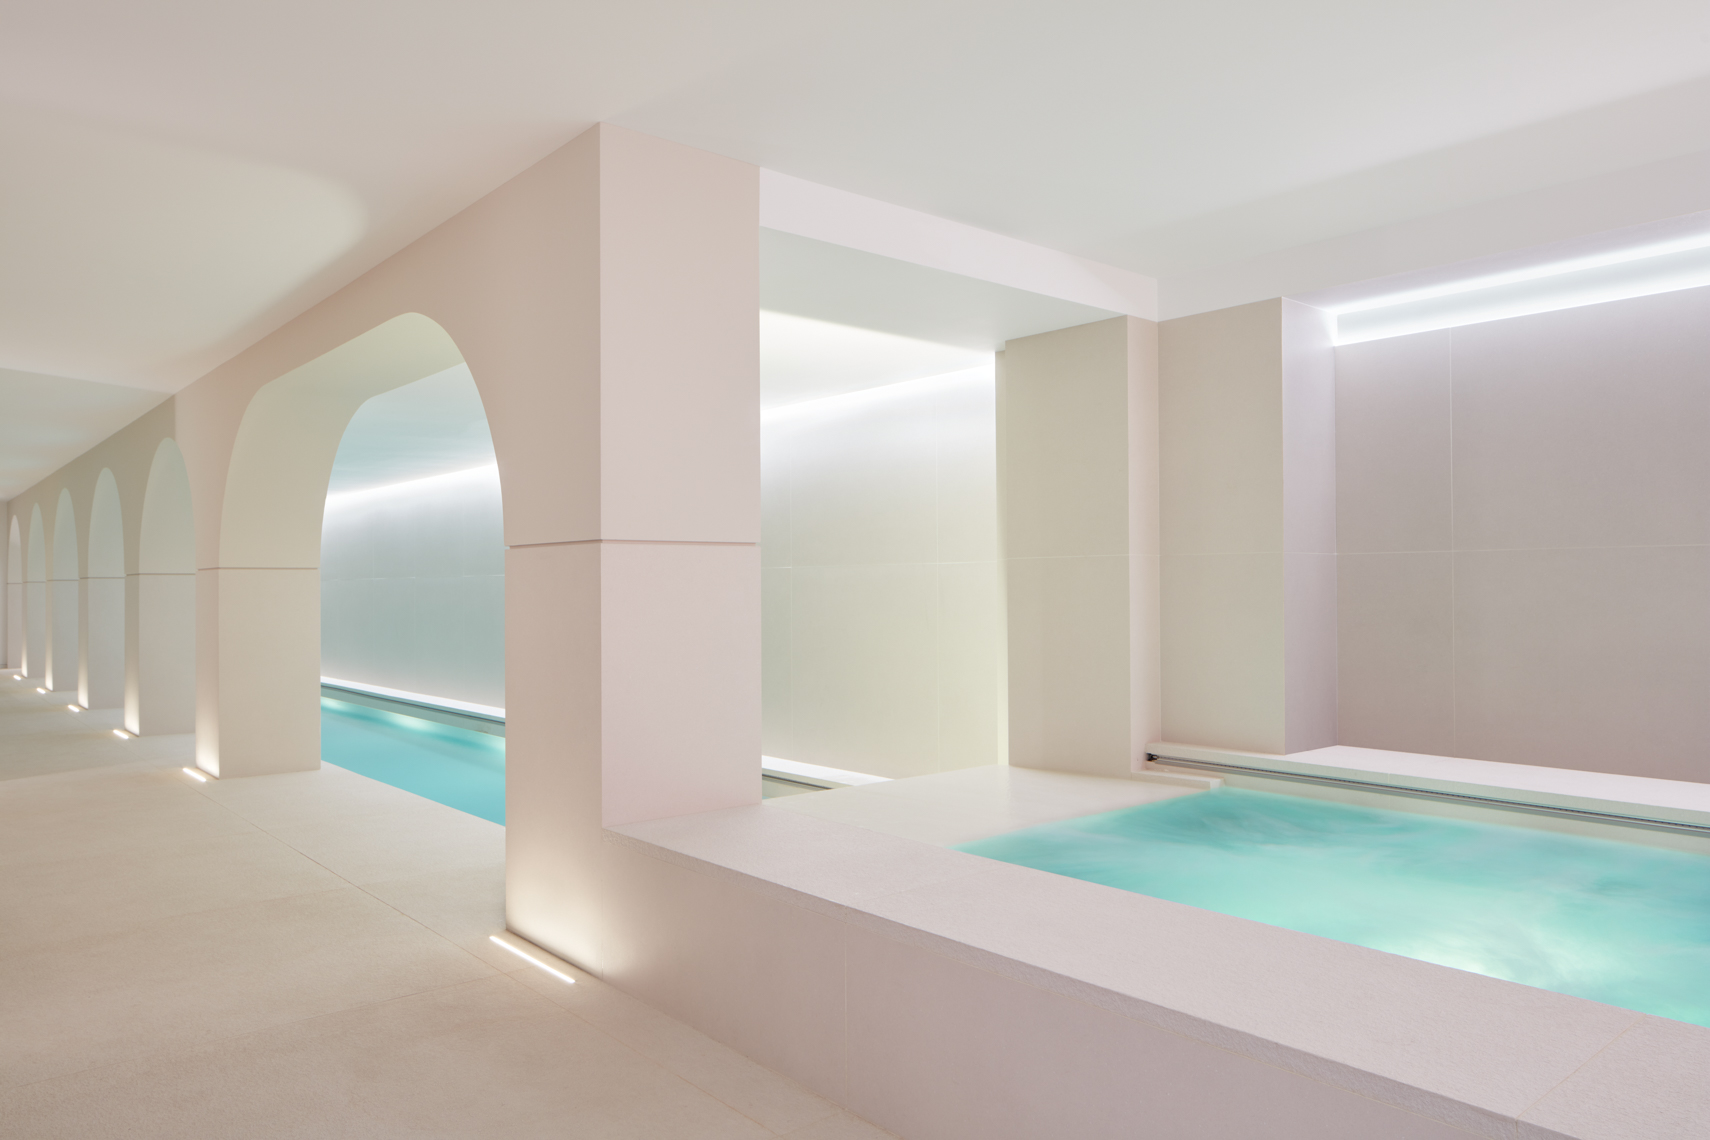 Brightly lit swimming pool with arched interior columns